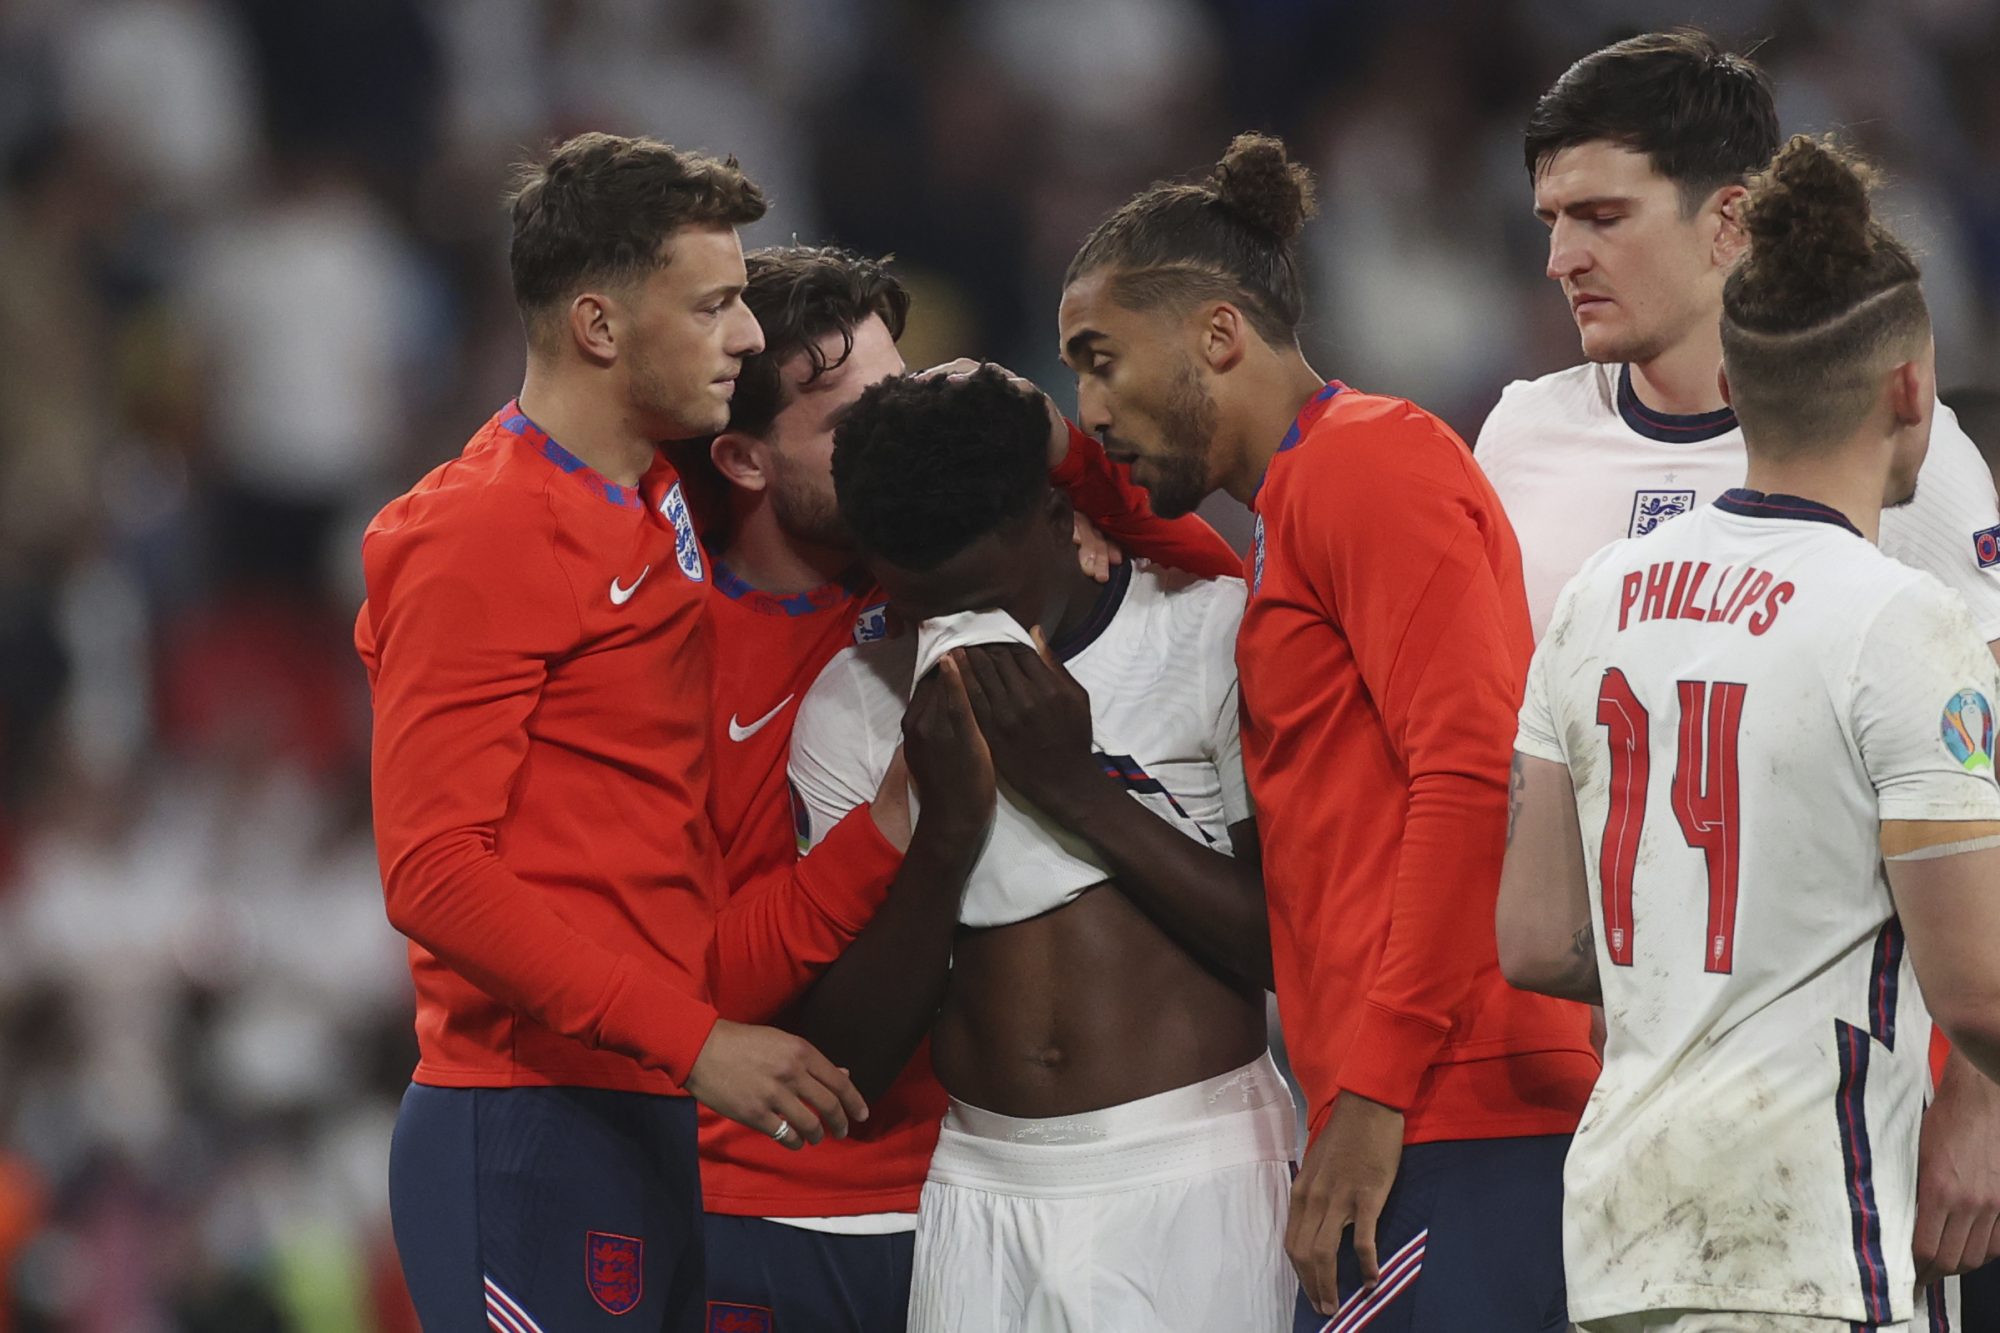 Police investigate racist abuse of three England players